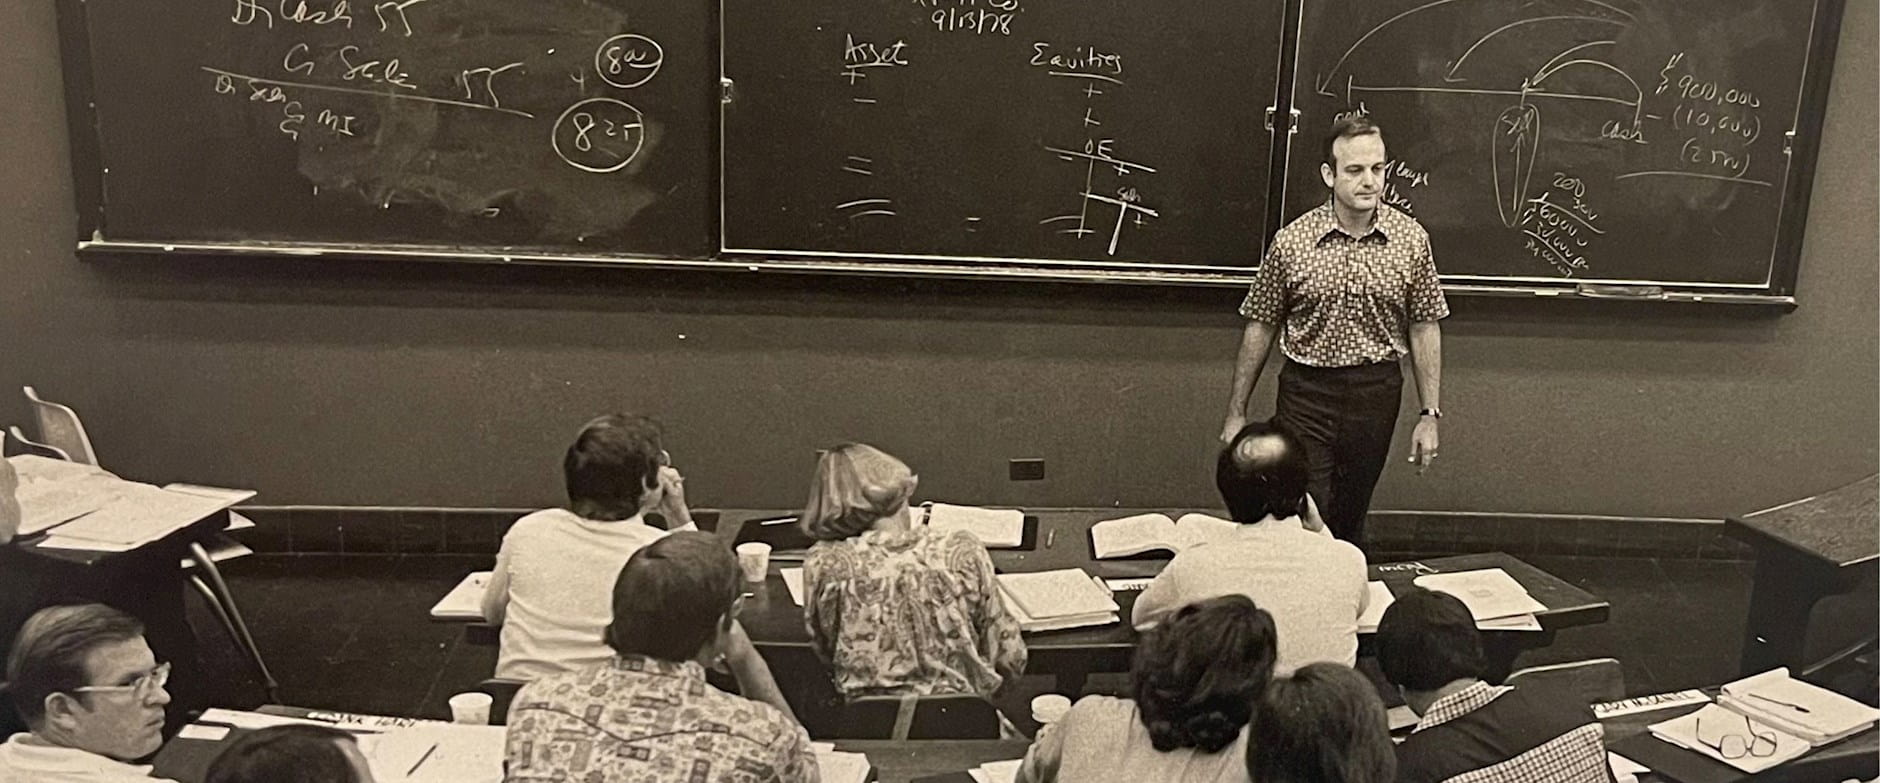 Roman Weil teaching at Booth in Hyde Park, 1970s